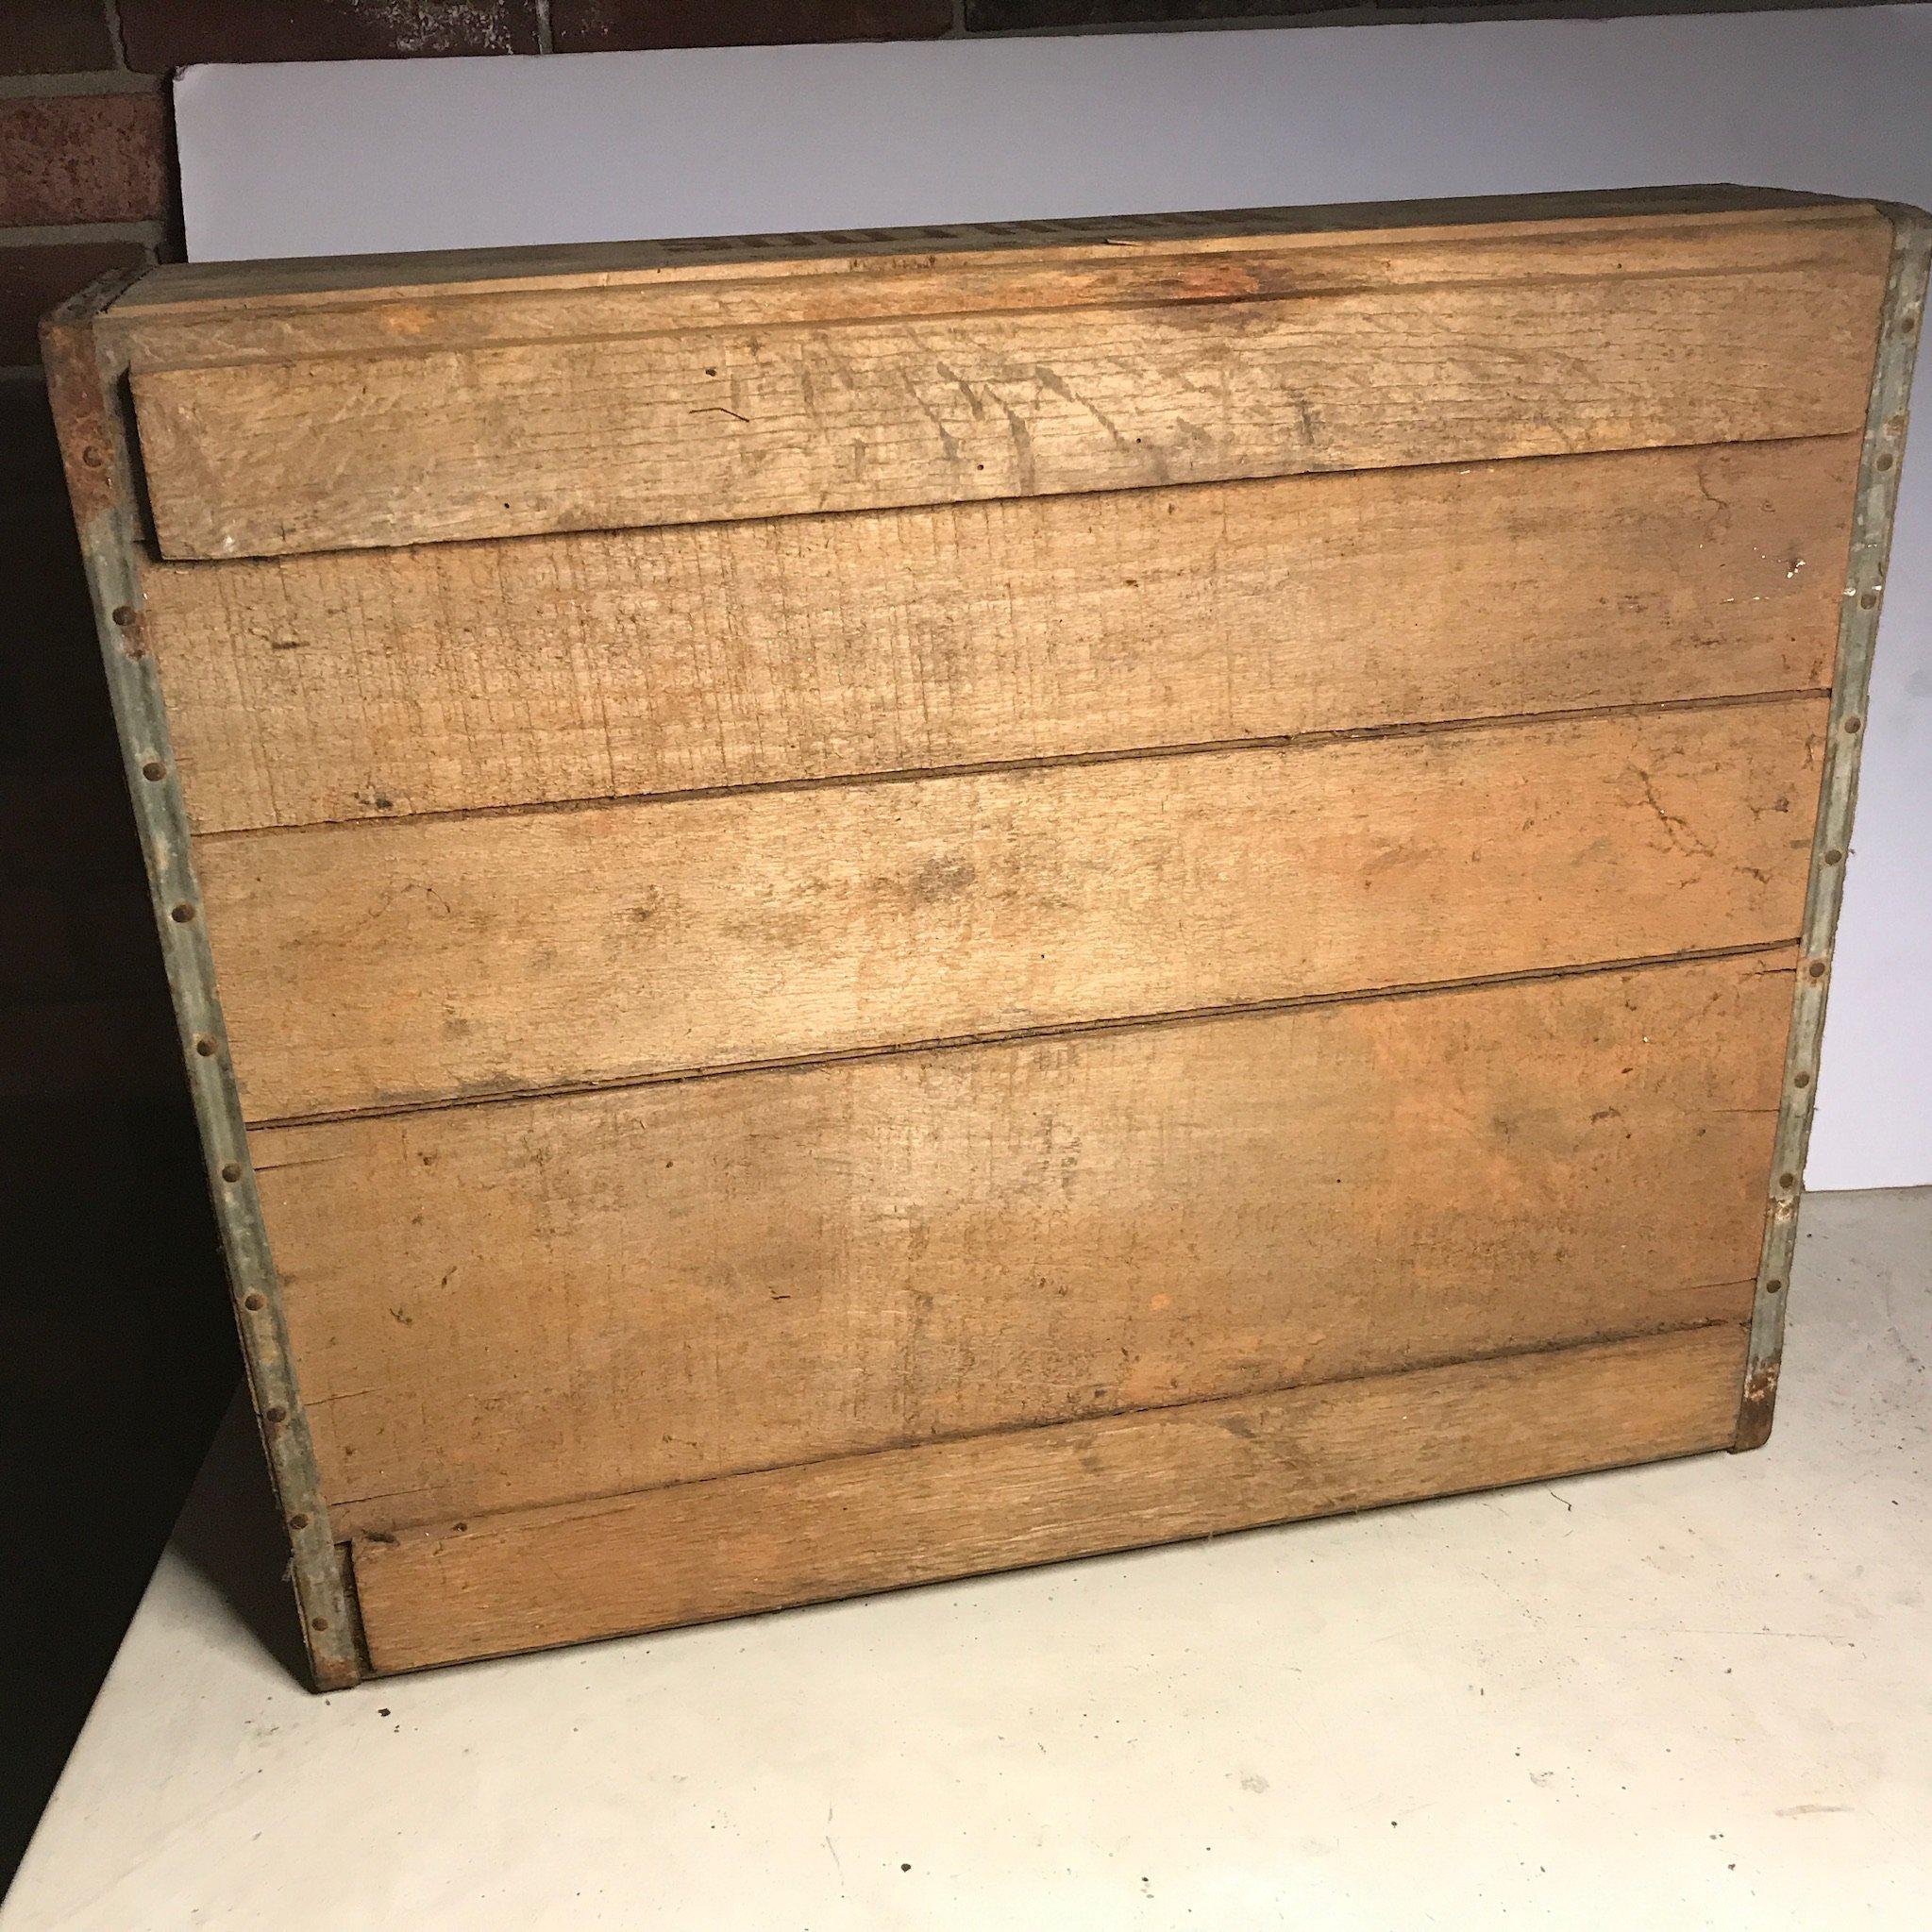 Primitive Large "Southern Bread & Cake" Wooden Crate